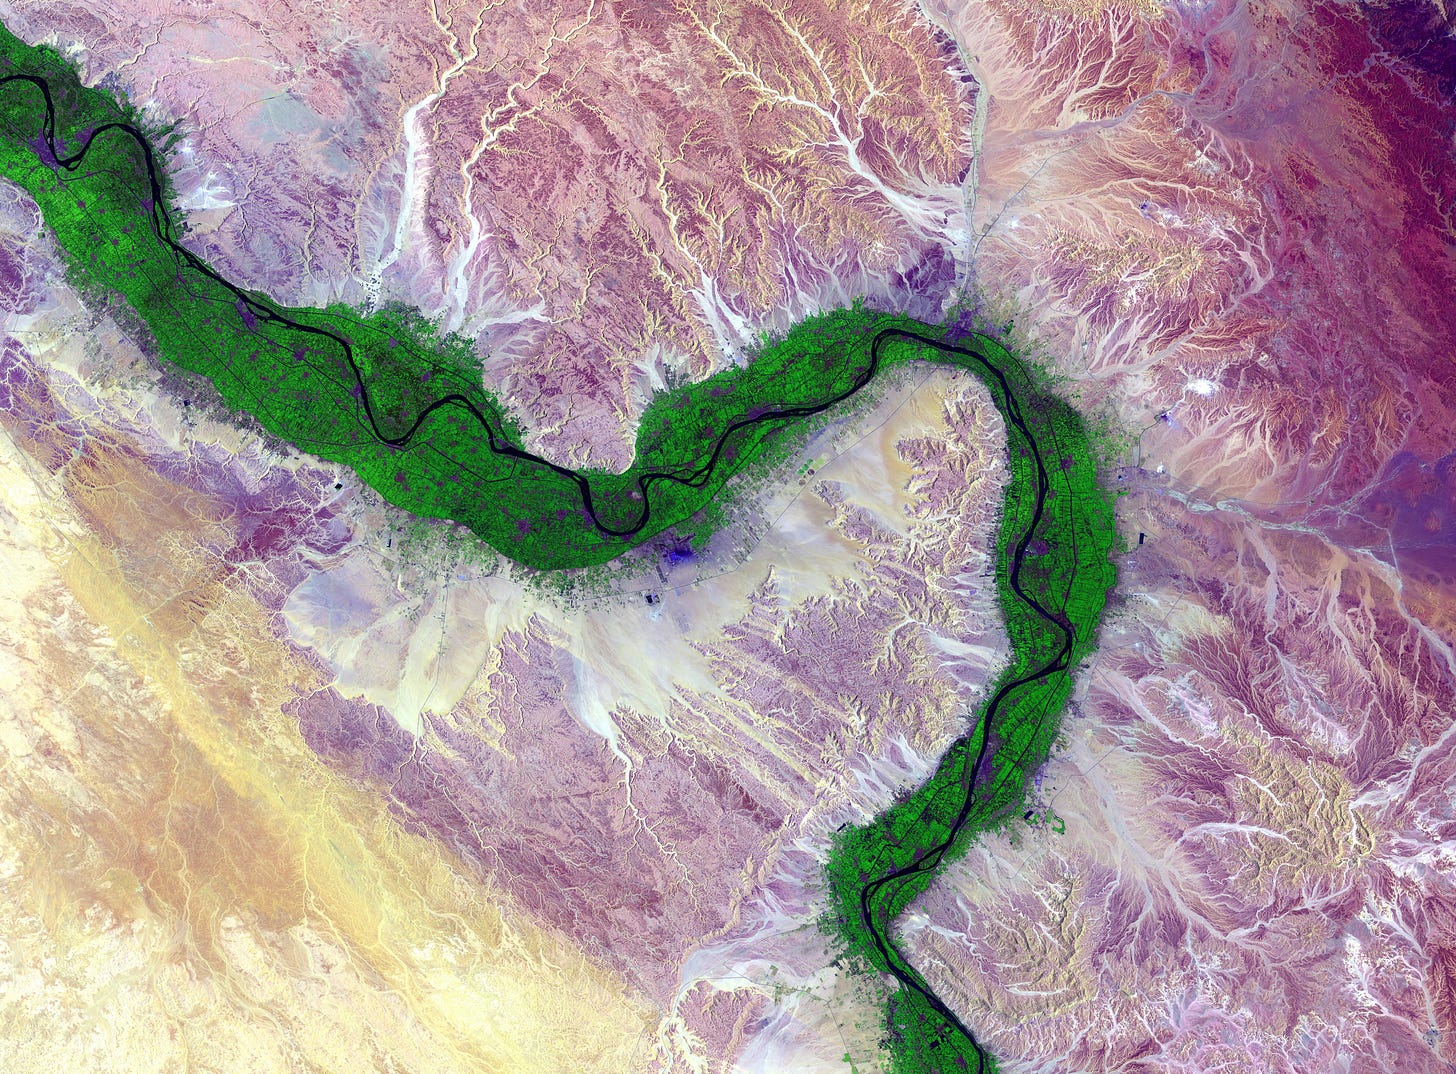 Satellite image of River Nile, beautiful in dark green, purple, pale yellow and white